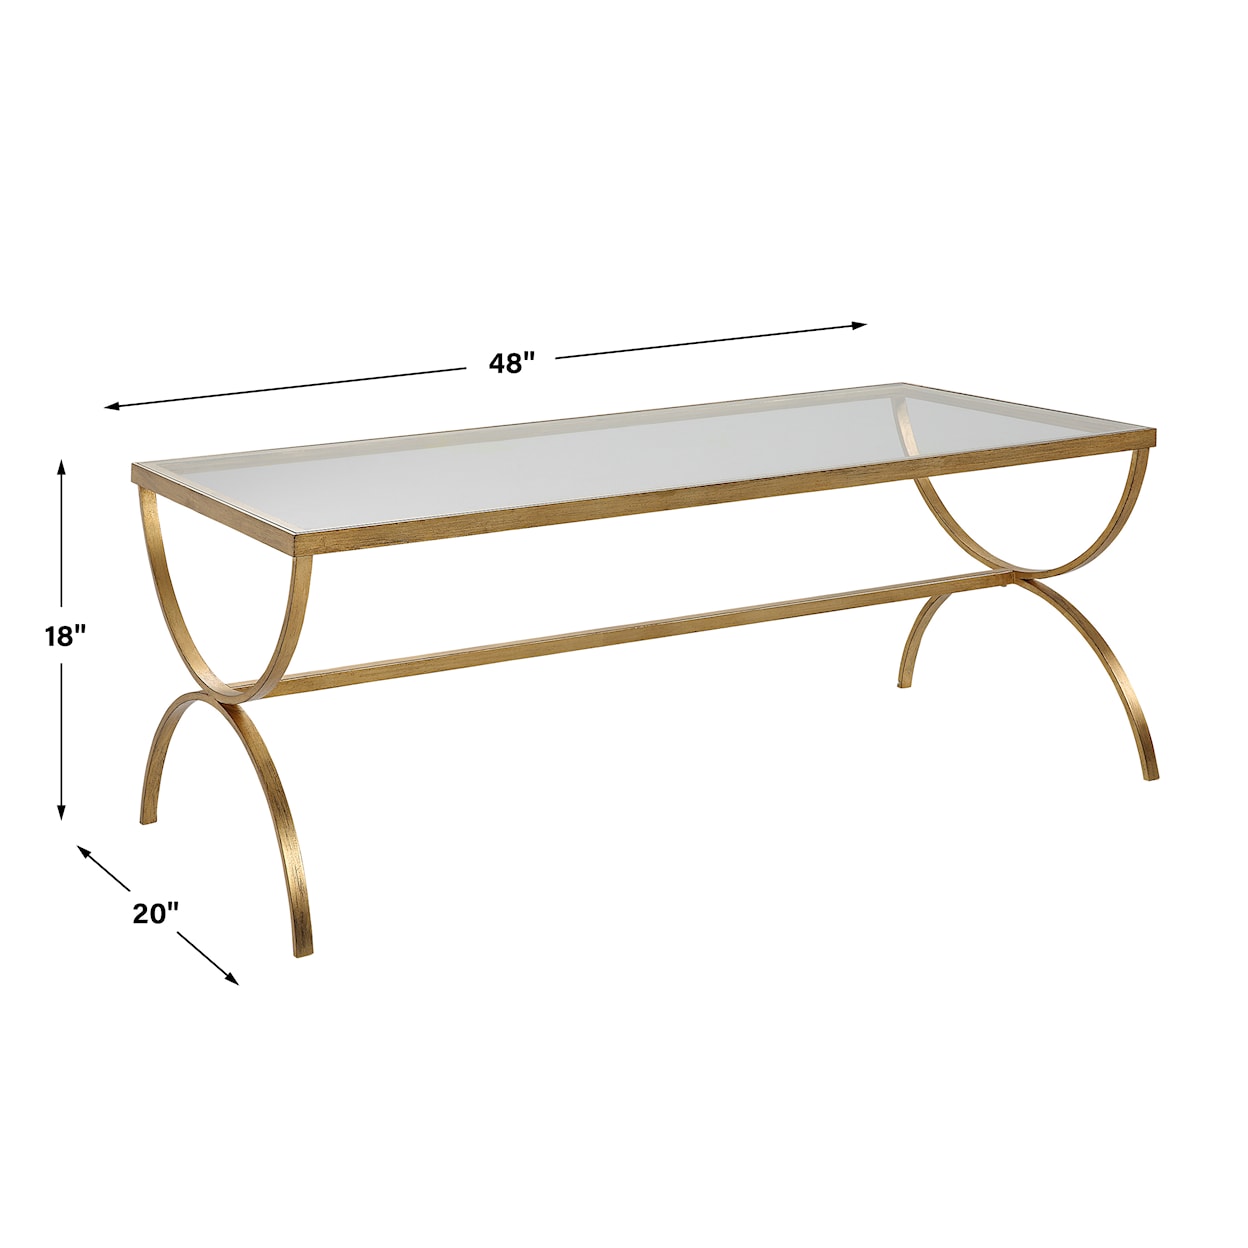 Uttermost Crescent Crescent Coffee Table